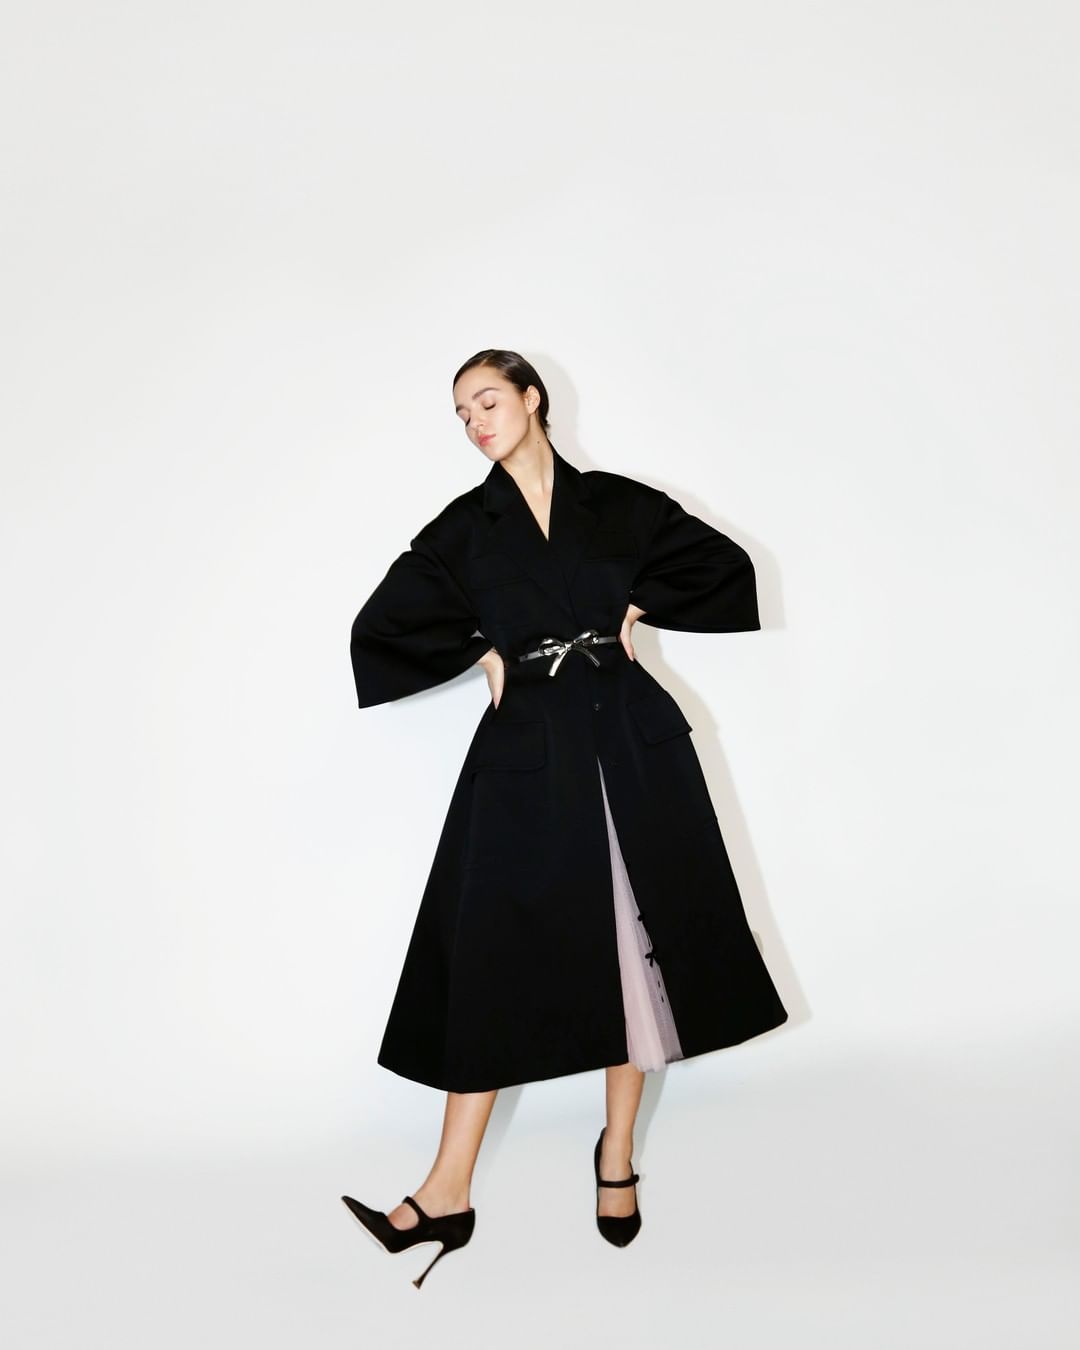 CAROLINA HERRERA - Wide sleeves and patch pockets give this beautifully tailored coat from the #prefall2020 collection by @wesgordon a modern yet timeless look. Styled with a leather belt with a polis...